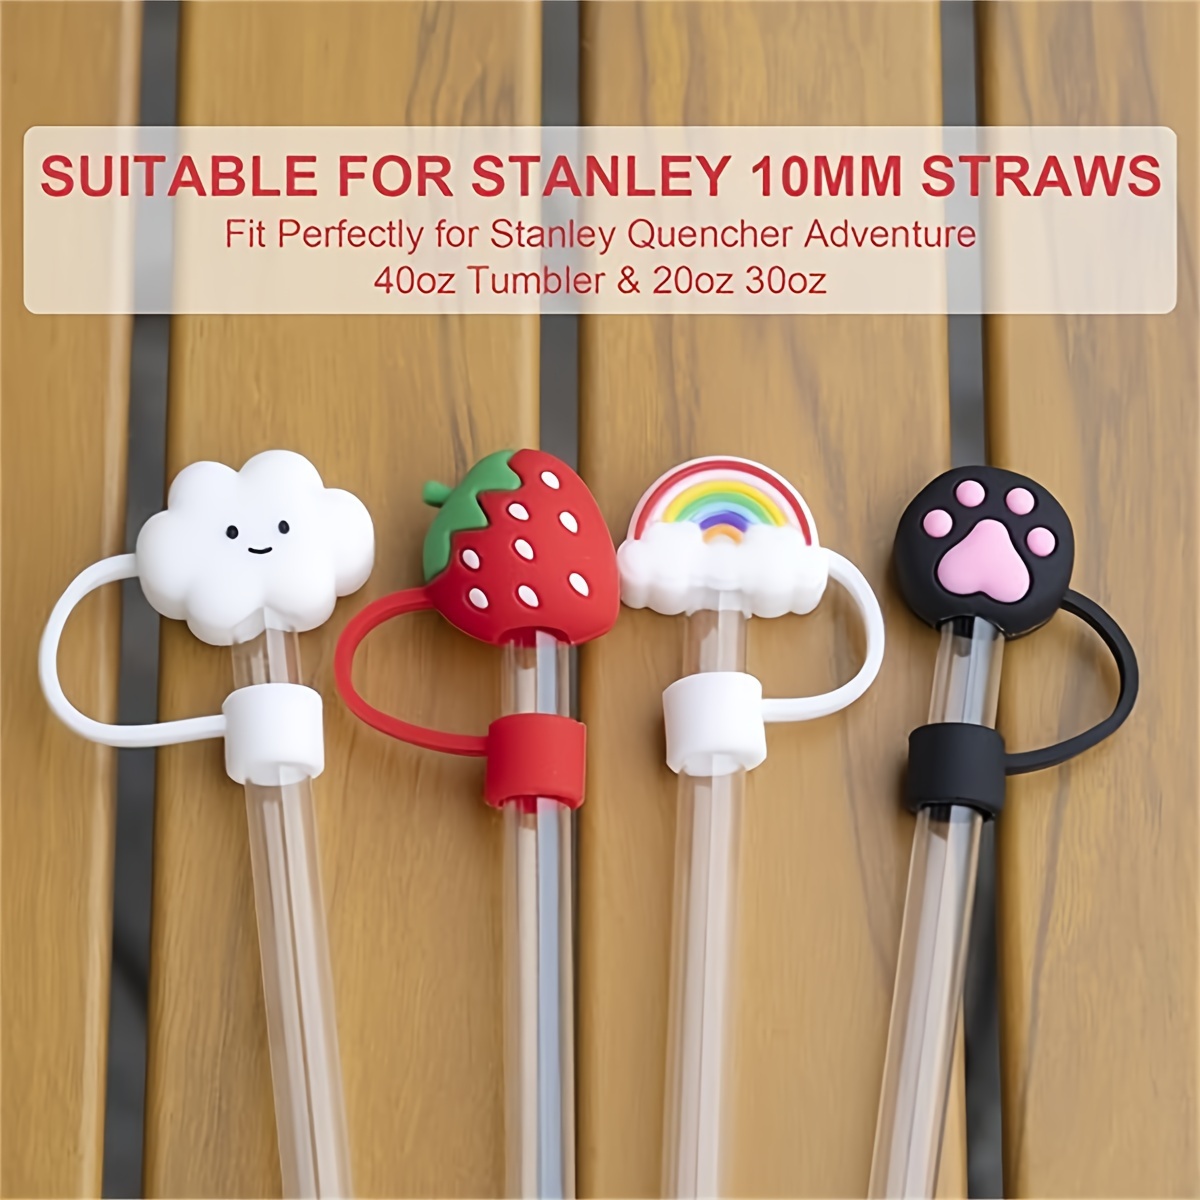 Straw Tips Cover, Reusable Straw Toppers, Kawaii Cartoon Silicone Straw  Sleeve , Decorative Straw , For Party Favor Bags,friends Gathering,  Dustproof Straw Covers For Stanley Cup, Party Supplies, Thanksgiving  Chrismas Halloween Gifts 